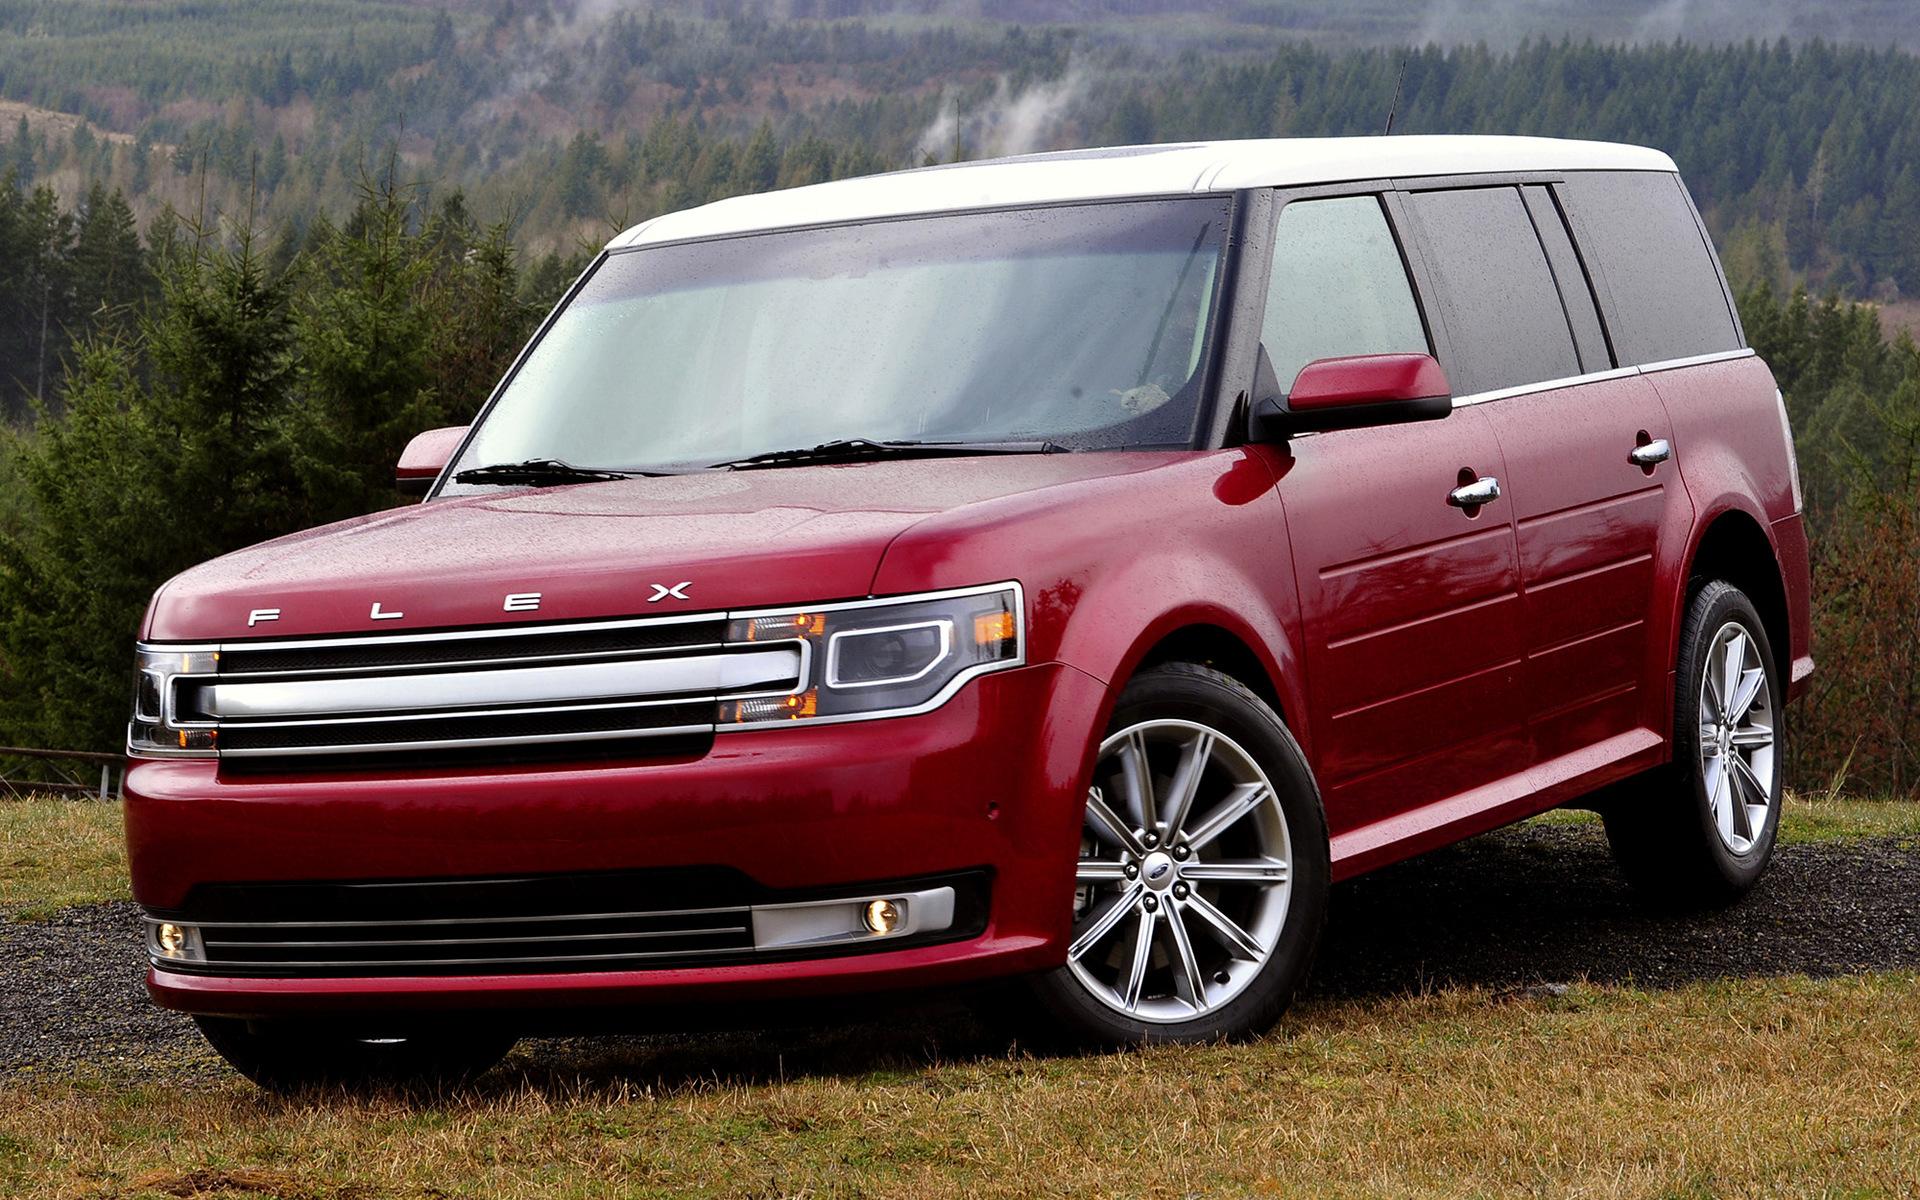 Ford Flex and HD Image